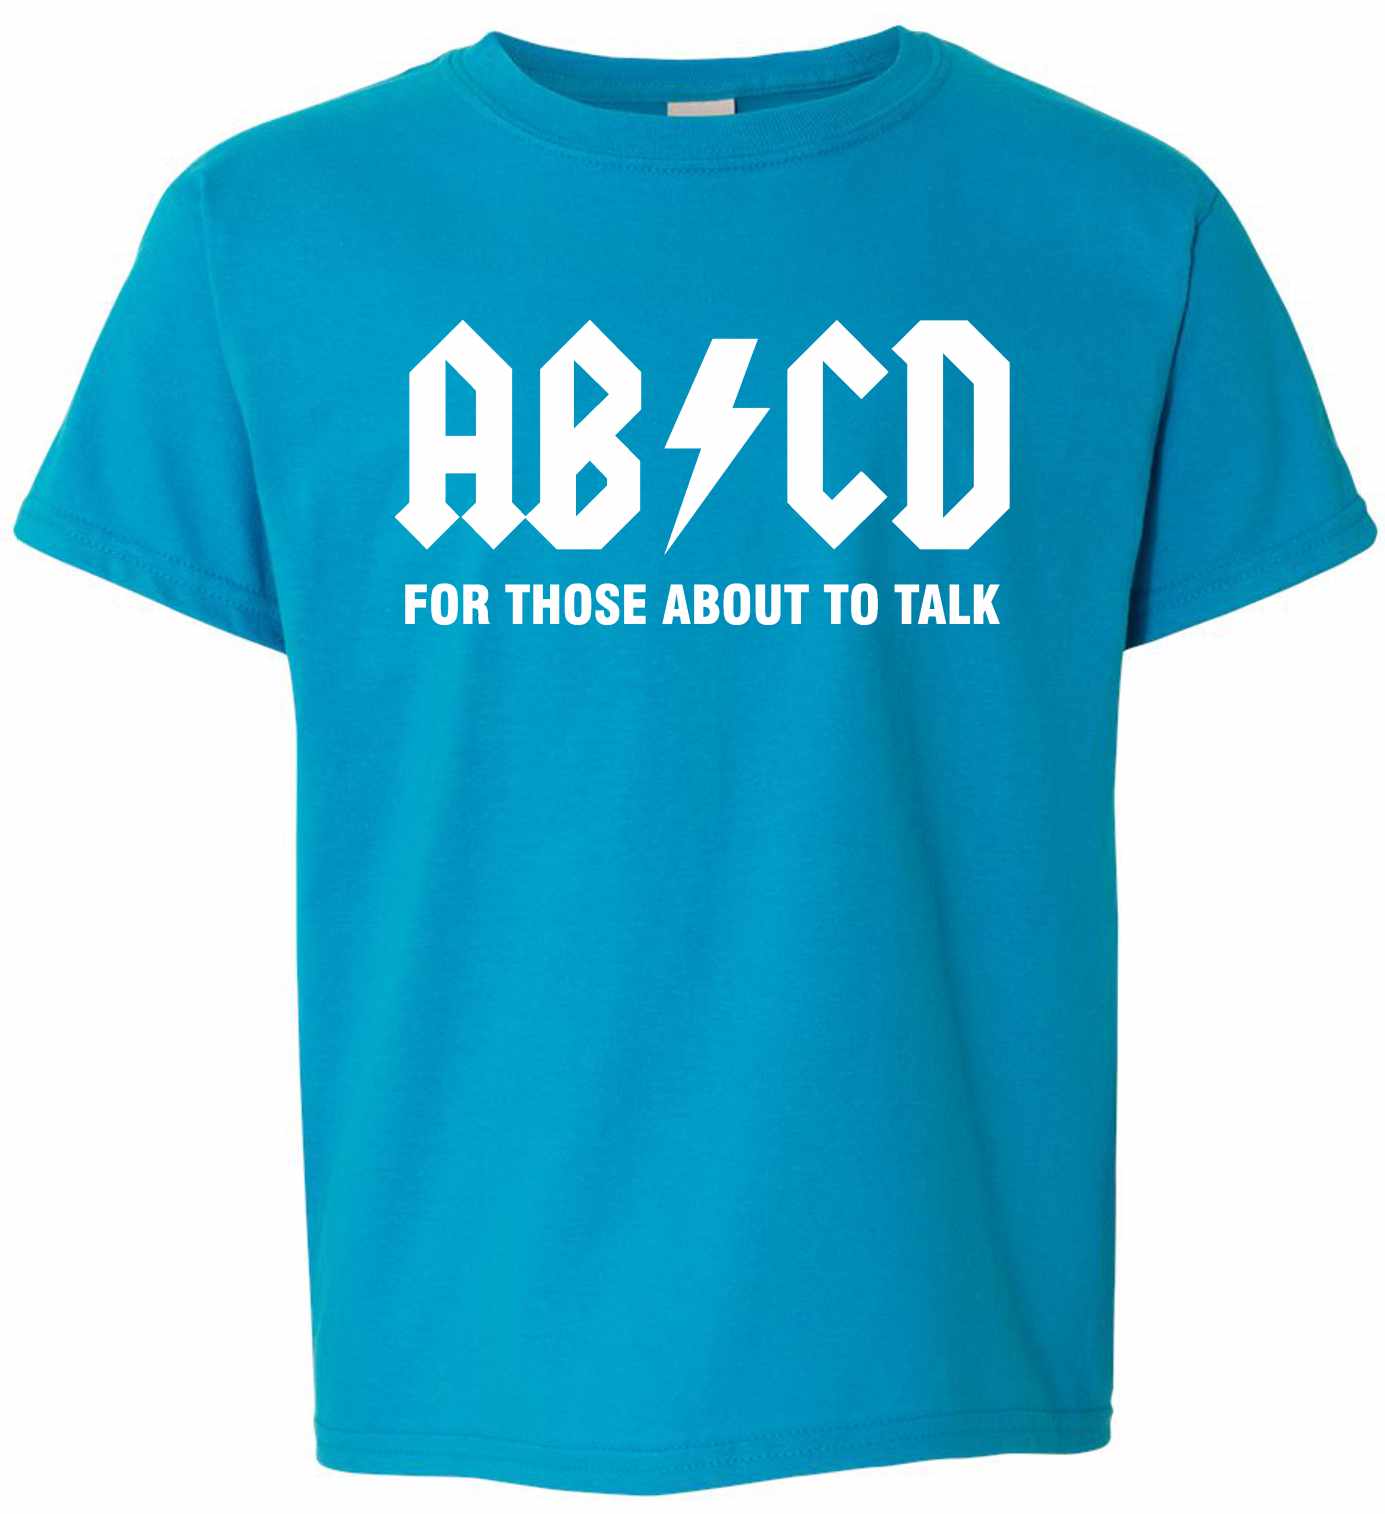 ABCD For Those About To Talk on Youth T-Shirt